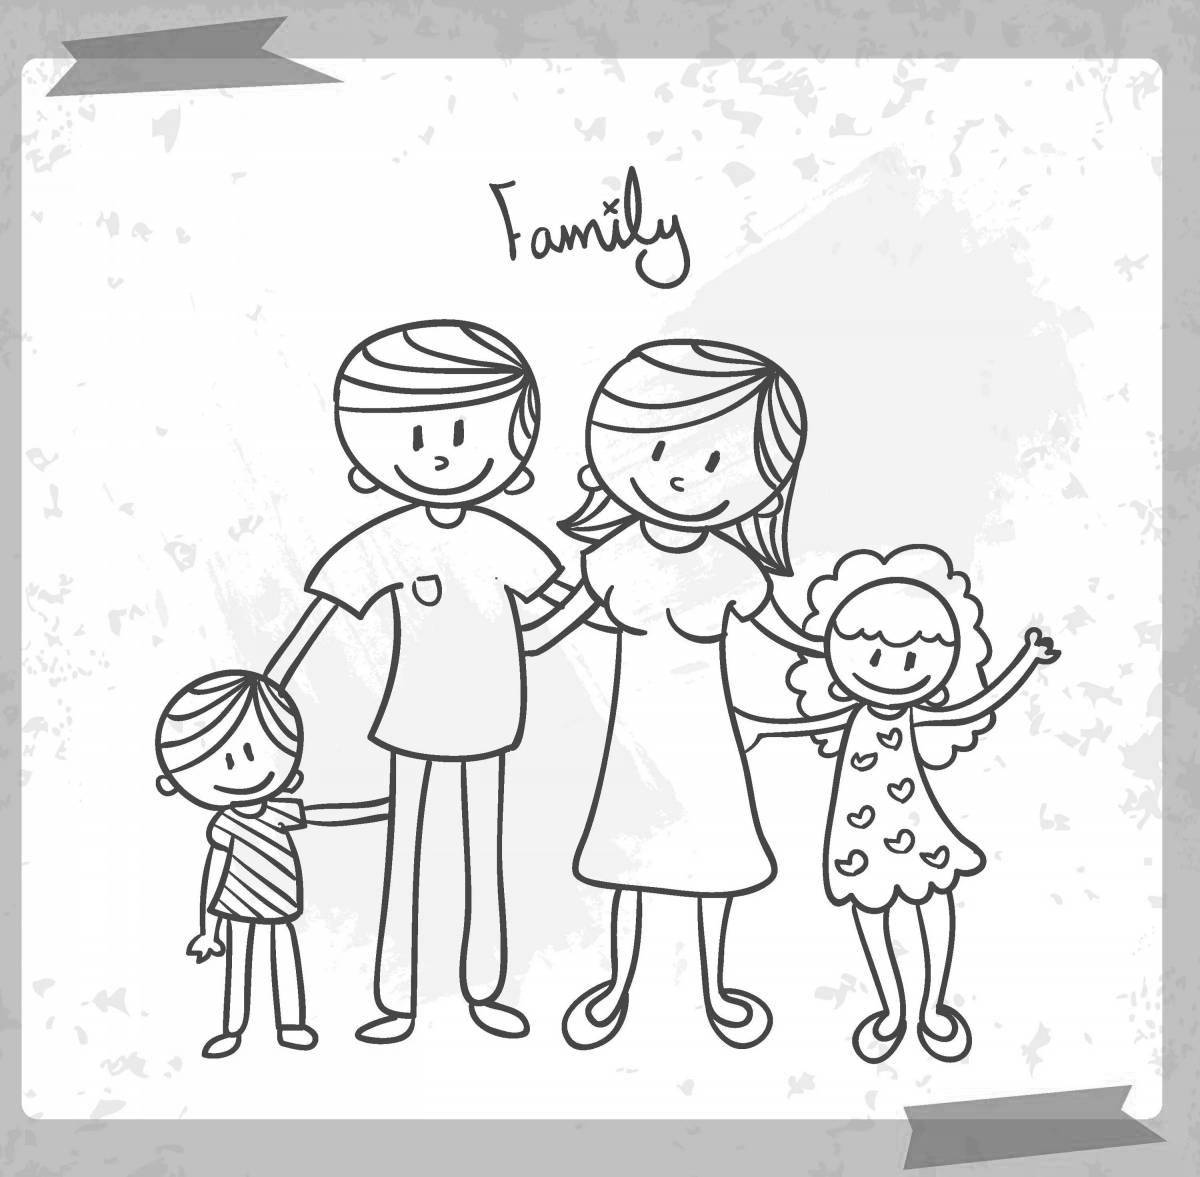 Creative family coloring book for girls